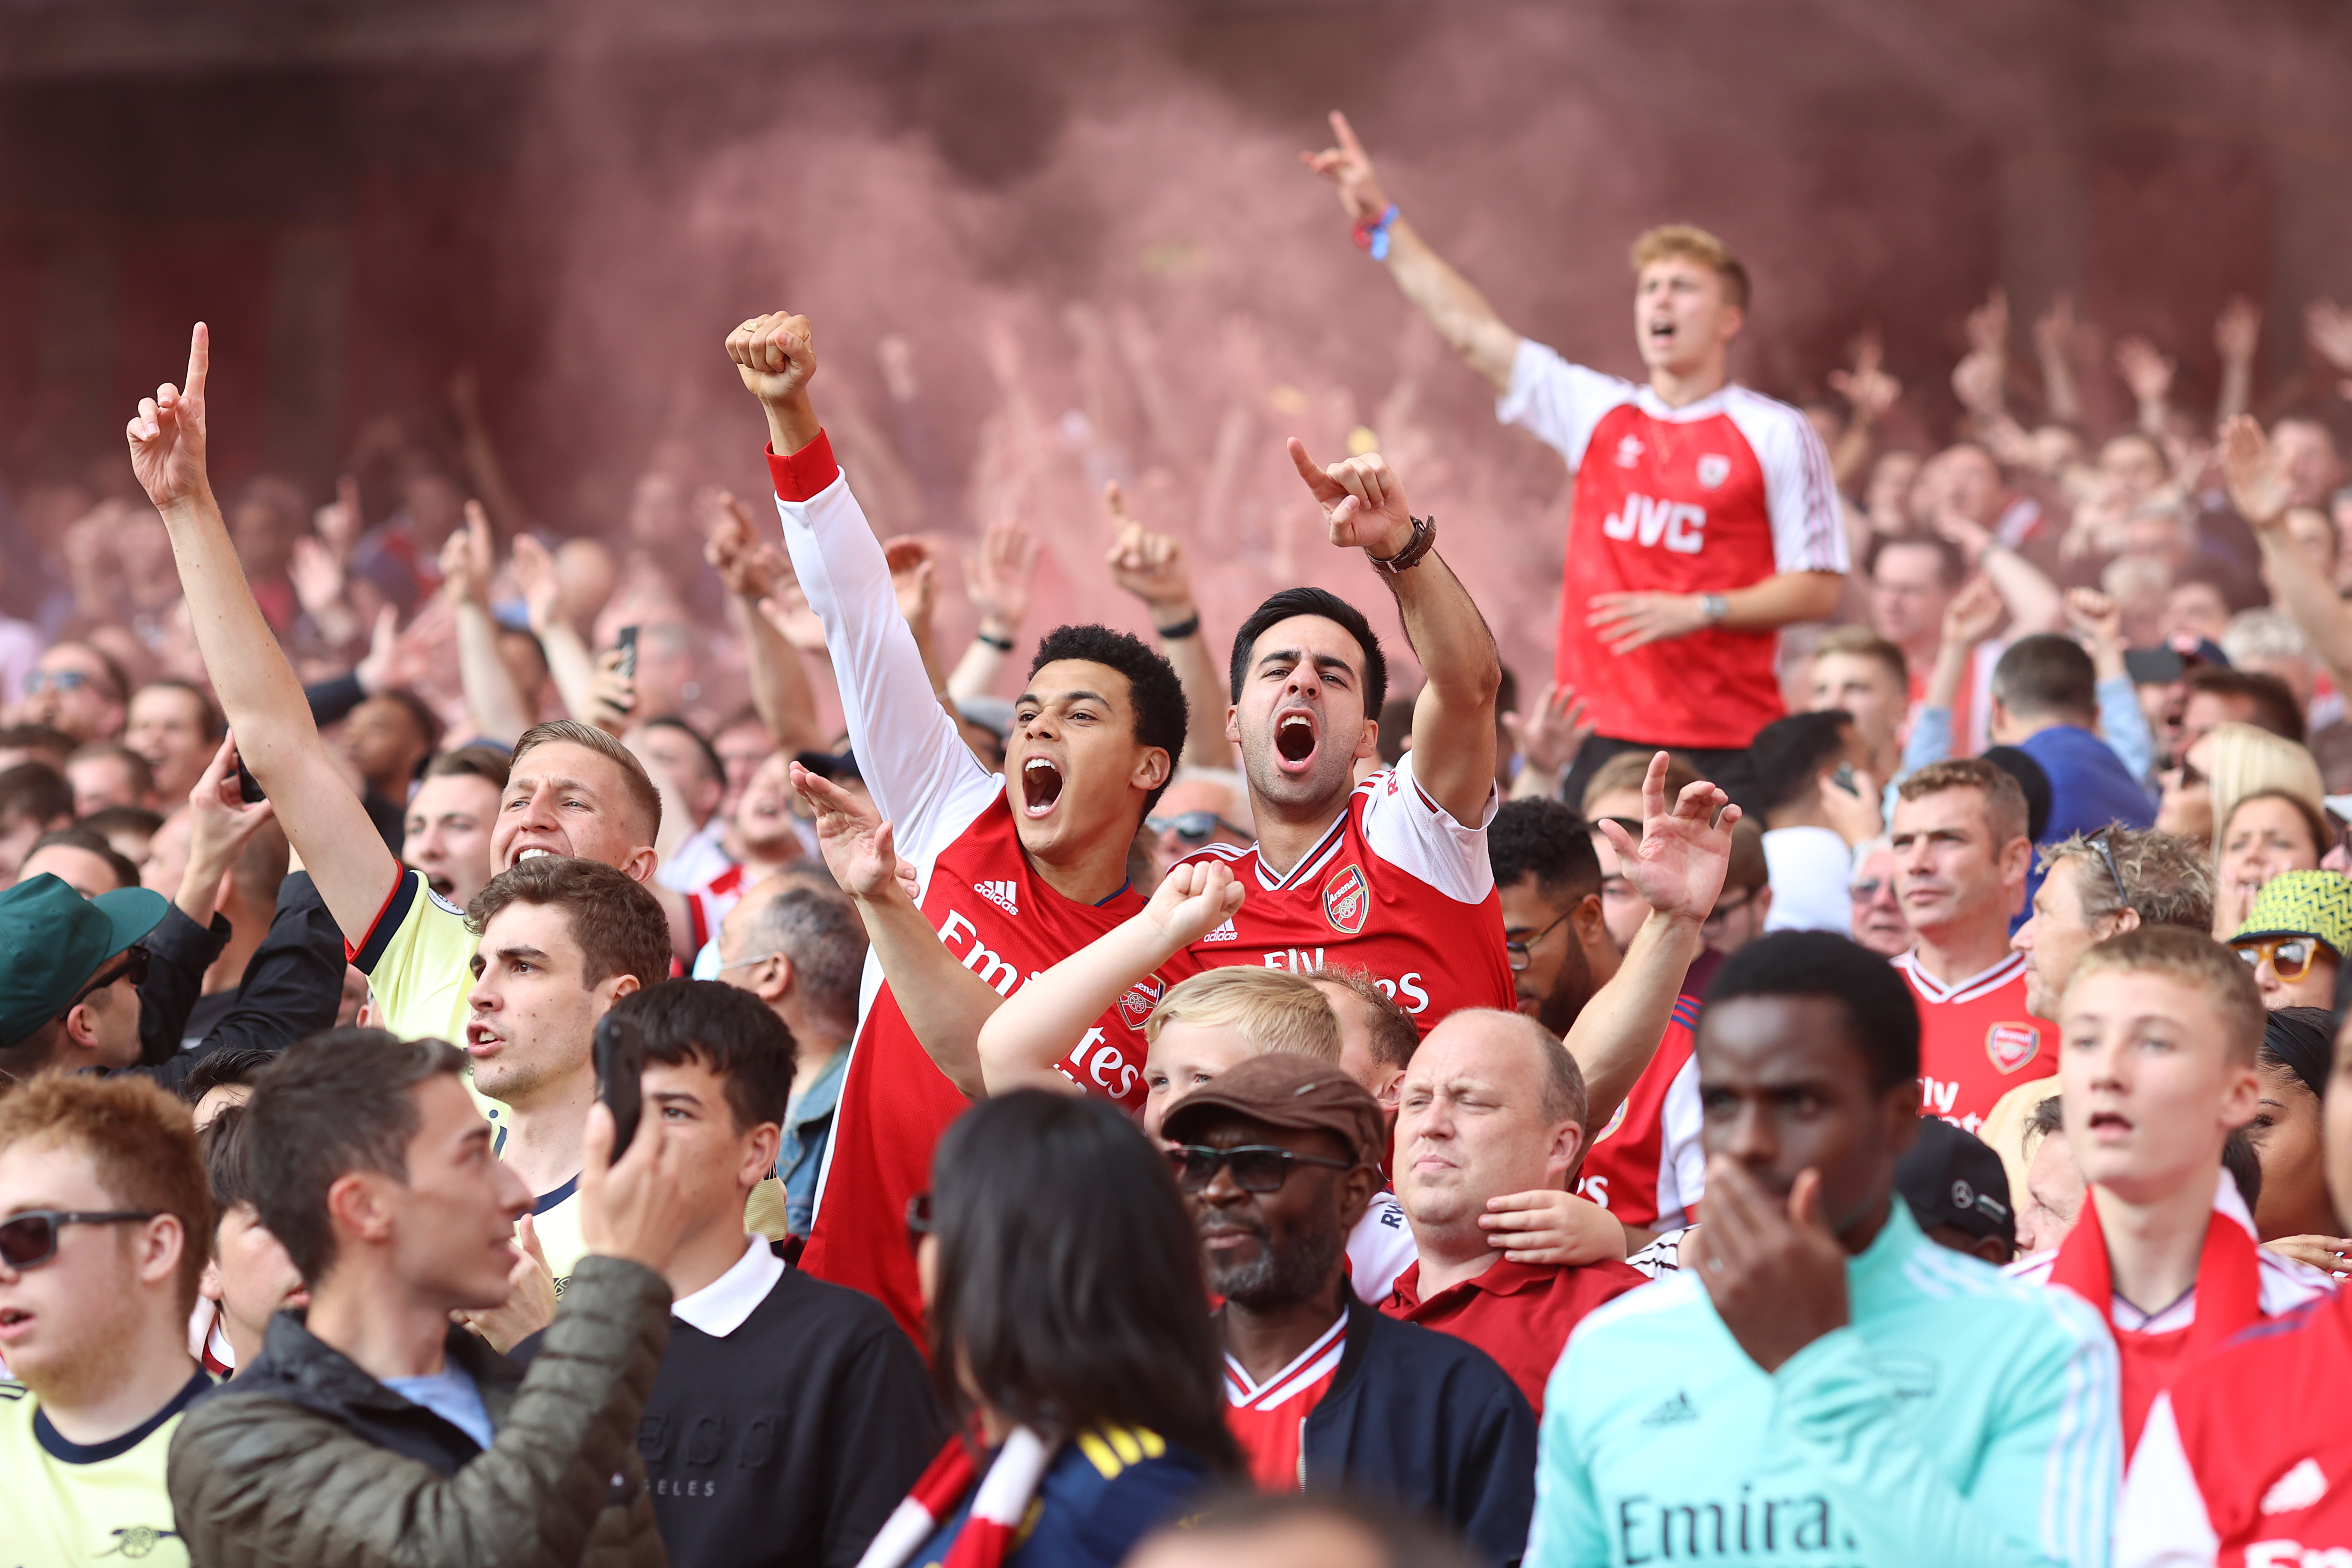 Arsenal canvas supporters on safe standing but admit capacity may fall and tickets won't be cheaper